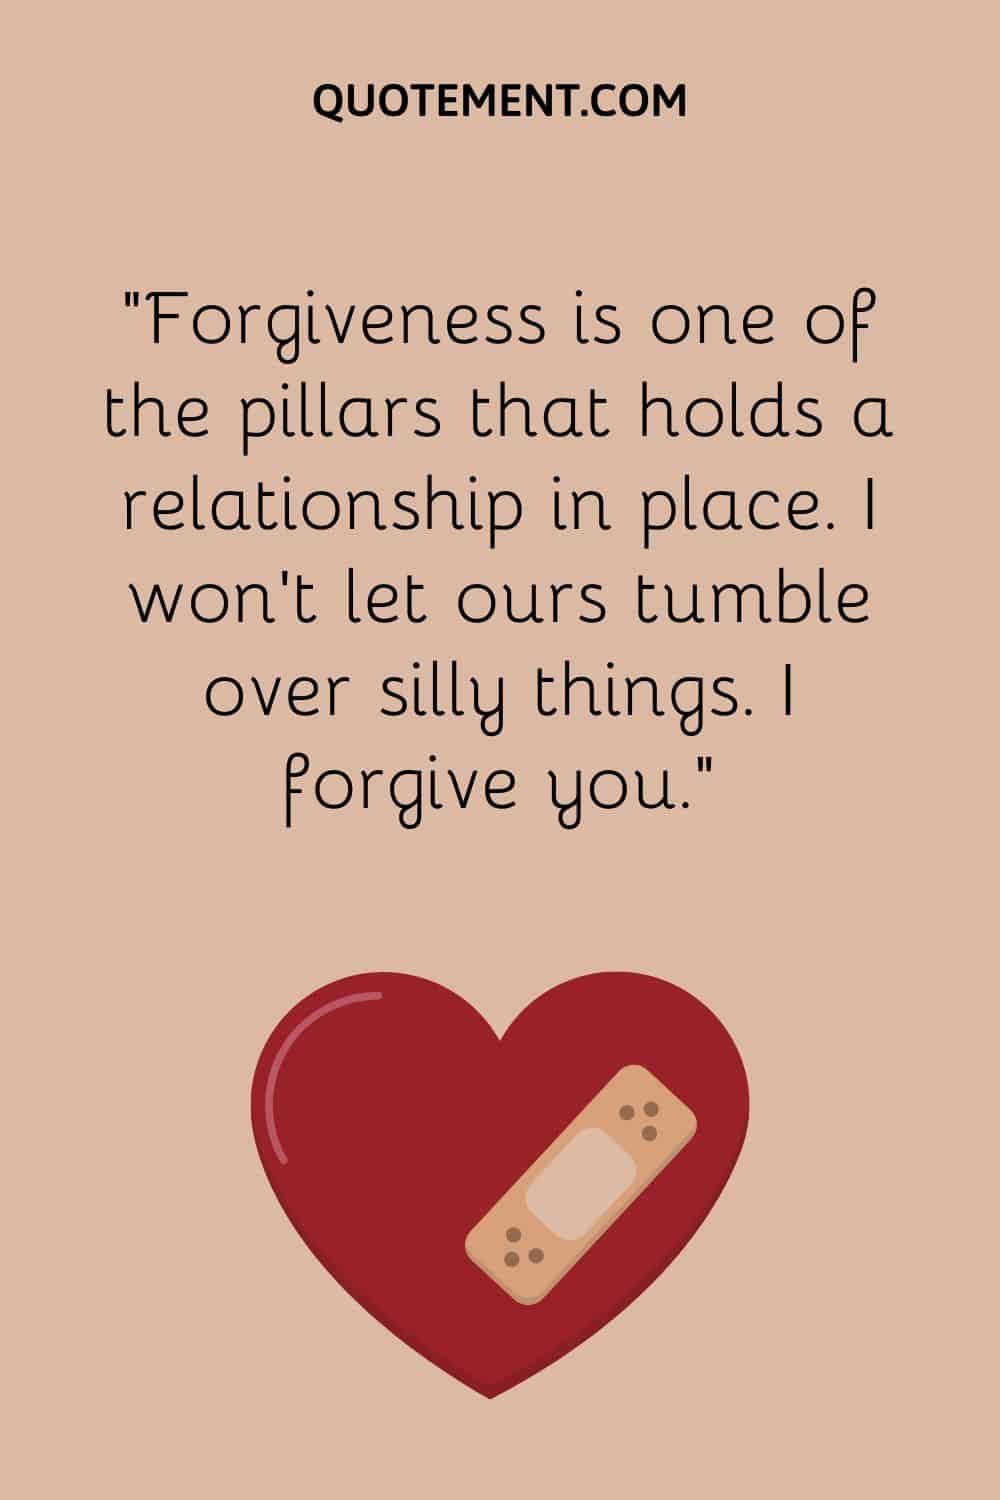 Forgiveness is one of the pillars that holds a relationship in place